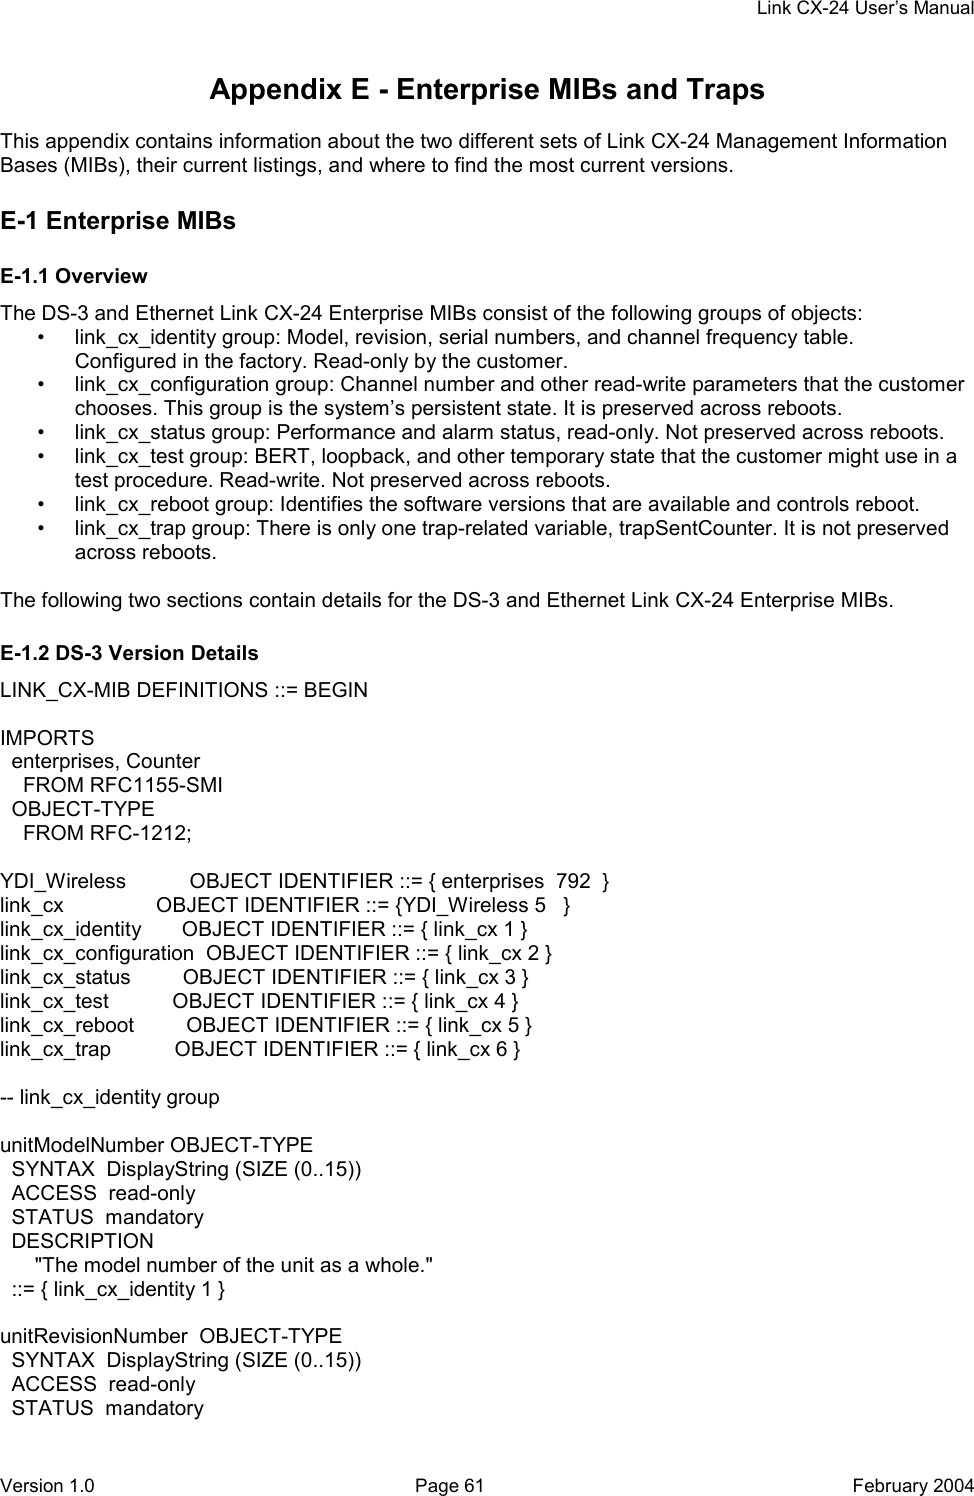     Link CX-24 User’s Manual Version 1.0  Page 61  February 2004 Appendix E - Enterprise MIBs and Traps  This appendix contains information about the two different sets of Link CX-24 Management Information Bases (MIBs), their current listings, and where to find the most current versions. E-1 Enterprise MIBs E-1.1 Overview The DS-3 and Ethernet Link CX-24 Enterprise MIBs consist of the following groups of objects: •  link_cx_identity group: Model, revision, serial numbers, and channel frequency table. Configured in the factory. Read-only by the customer. •  link_cx_configuration group: Channel number and other read-write parameters that the customer chooses. This group is the system’s persistent state. It is preserved across reboots. •  link_cx_status group: Performance and alarm status, read-only. Not preserved across reboots. •  link_cx_test group: BERT, loopback, and other temporary state that the customer might use in a test procedure. Read-write. Not preserved across reboots. •  link_cx_reboot group: Identifies the software versions that are available and controls reboot. •  link_cx_trap group: There is only one trap-related variable, trapSentCounter. It is not preserved across reboots.  The following two sections contain details for the DS-3 and Ethernet Link CX-24 Enterprise MIBs. E-1.2 DS-3 Version Details LINK_CX-MIB DEFINITIONS ::= BEGIN  IMPORTS   enterprises, Counter     FROM RFC1155-SMI   OBJECT-TYPE     FROM RFC-1212;  YDI_Wireless           OBJECT IDENTIFIER ::= { enterprises  792  } link_cx                OBJECT IDENTIFIER ::= {YDI_Wireless 5   } link_cx_identity       OBJECT IDENTIFIER ::= { link_cx 1 } link_cx_configuration  OBJECT IDENTIFIER ::= { link_cx 2 } link_cx_status         OBJECT IDENTIFIER ::= { link_cx 3 } link_cx_test           OBJECT IDENTIFIER ::= { link_cx 4 } link_cx_reboot         OBJECT IDENTIFIER ::= { link_cx 5 } link_cx_trap           OBJECT IDENTIFIER ::= { link_cx 6 }  -- link_cx_identity group  unitModelNumber OBJECT-TYPE   SYNTAX  DisplayString (SIZE (0..15))   ACCESS  read-only   STATUS  mandatory   DESCRIPTION       &quot;The model number of the unit as a whole.&quot;   ::= { link_cx_identity 1 }  unitRevisionNumber  OBJECT-TYPE   SYNTAX  DisplayString (SIZE (0..15))   ACCESS  read-only   STATUS  mandatory 